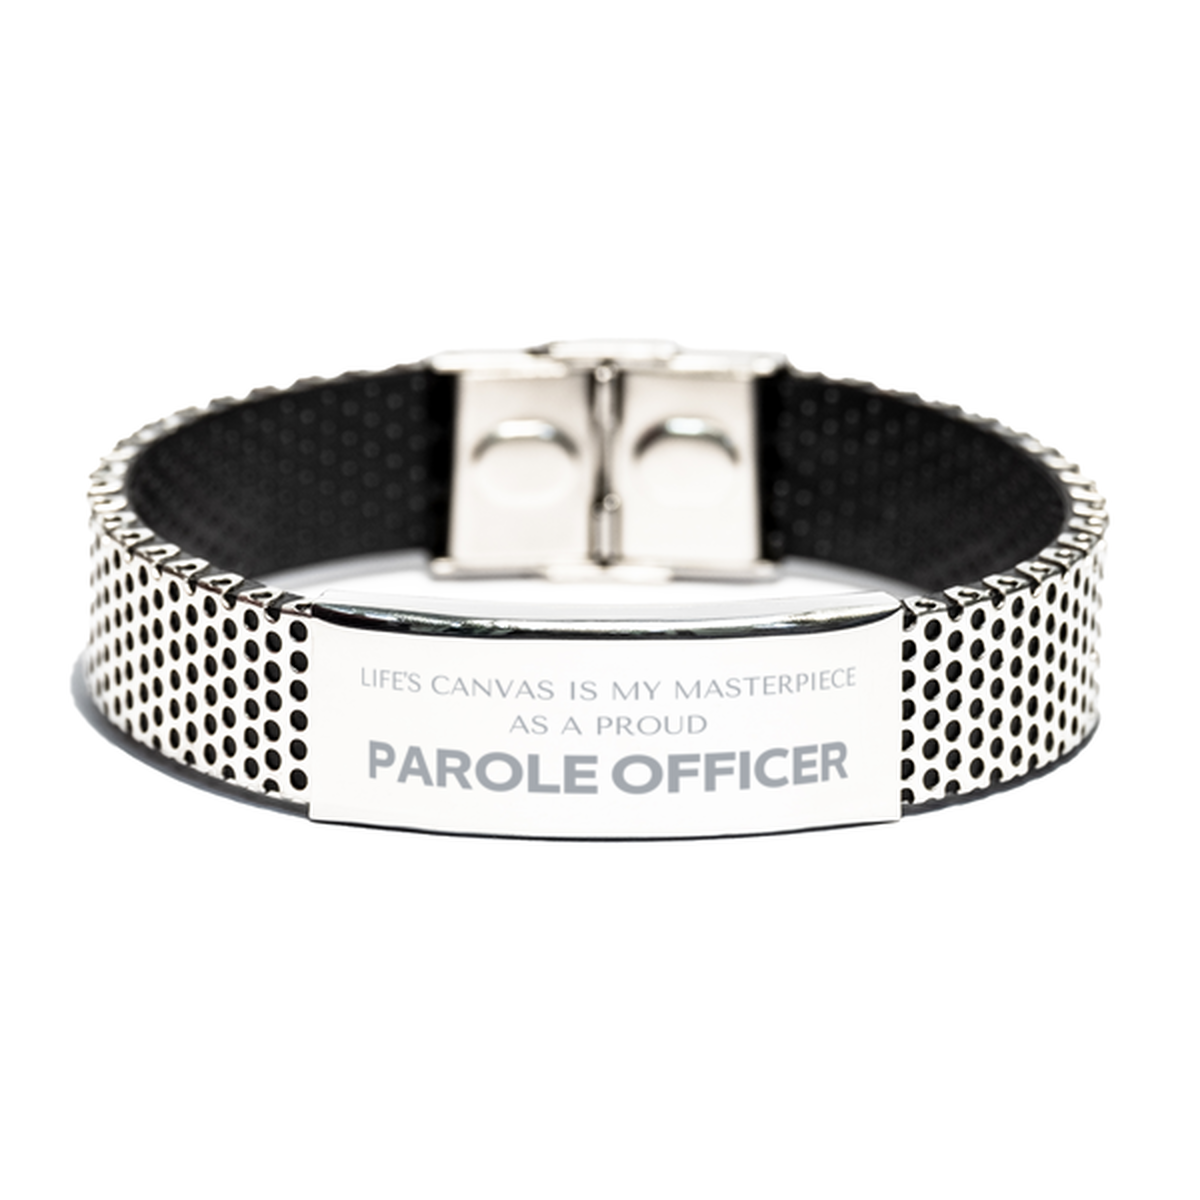 Proud Parole Officer Gifts, Life's canvas is my masterpiece, Epic Birthday Christmas Unique Stainless Steel Bracelet For Parole Officer, Coworkers, Men, Women, Friends